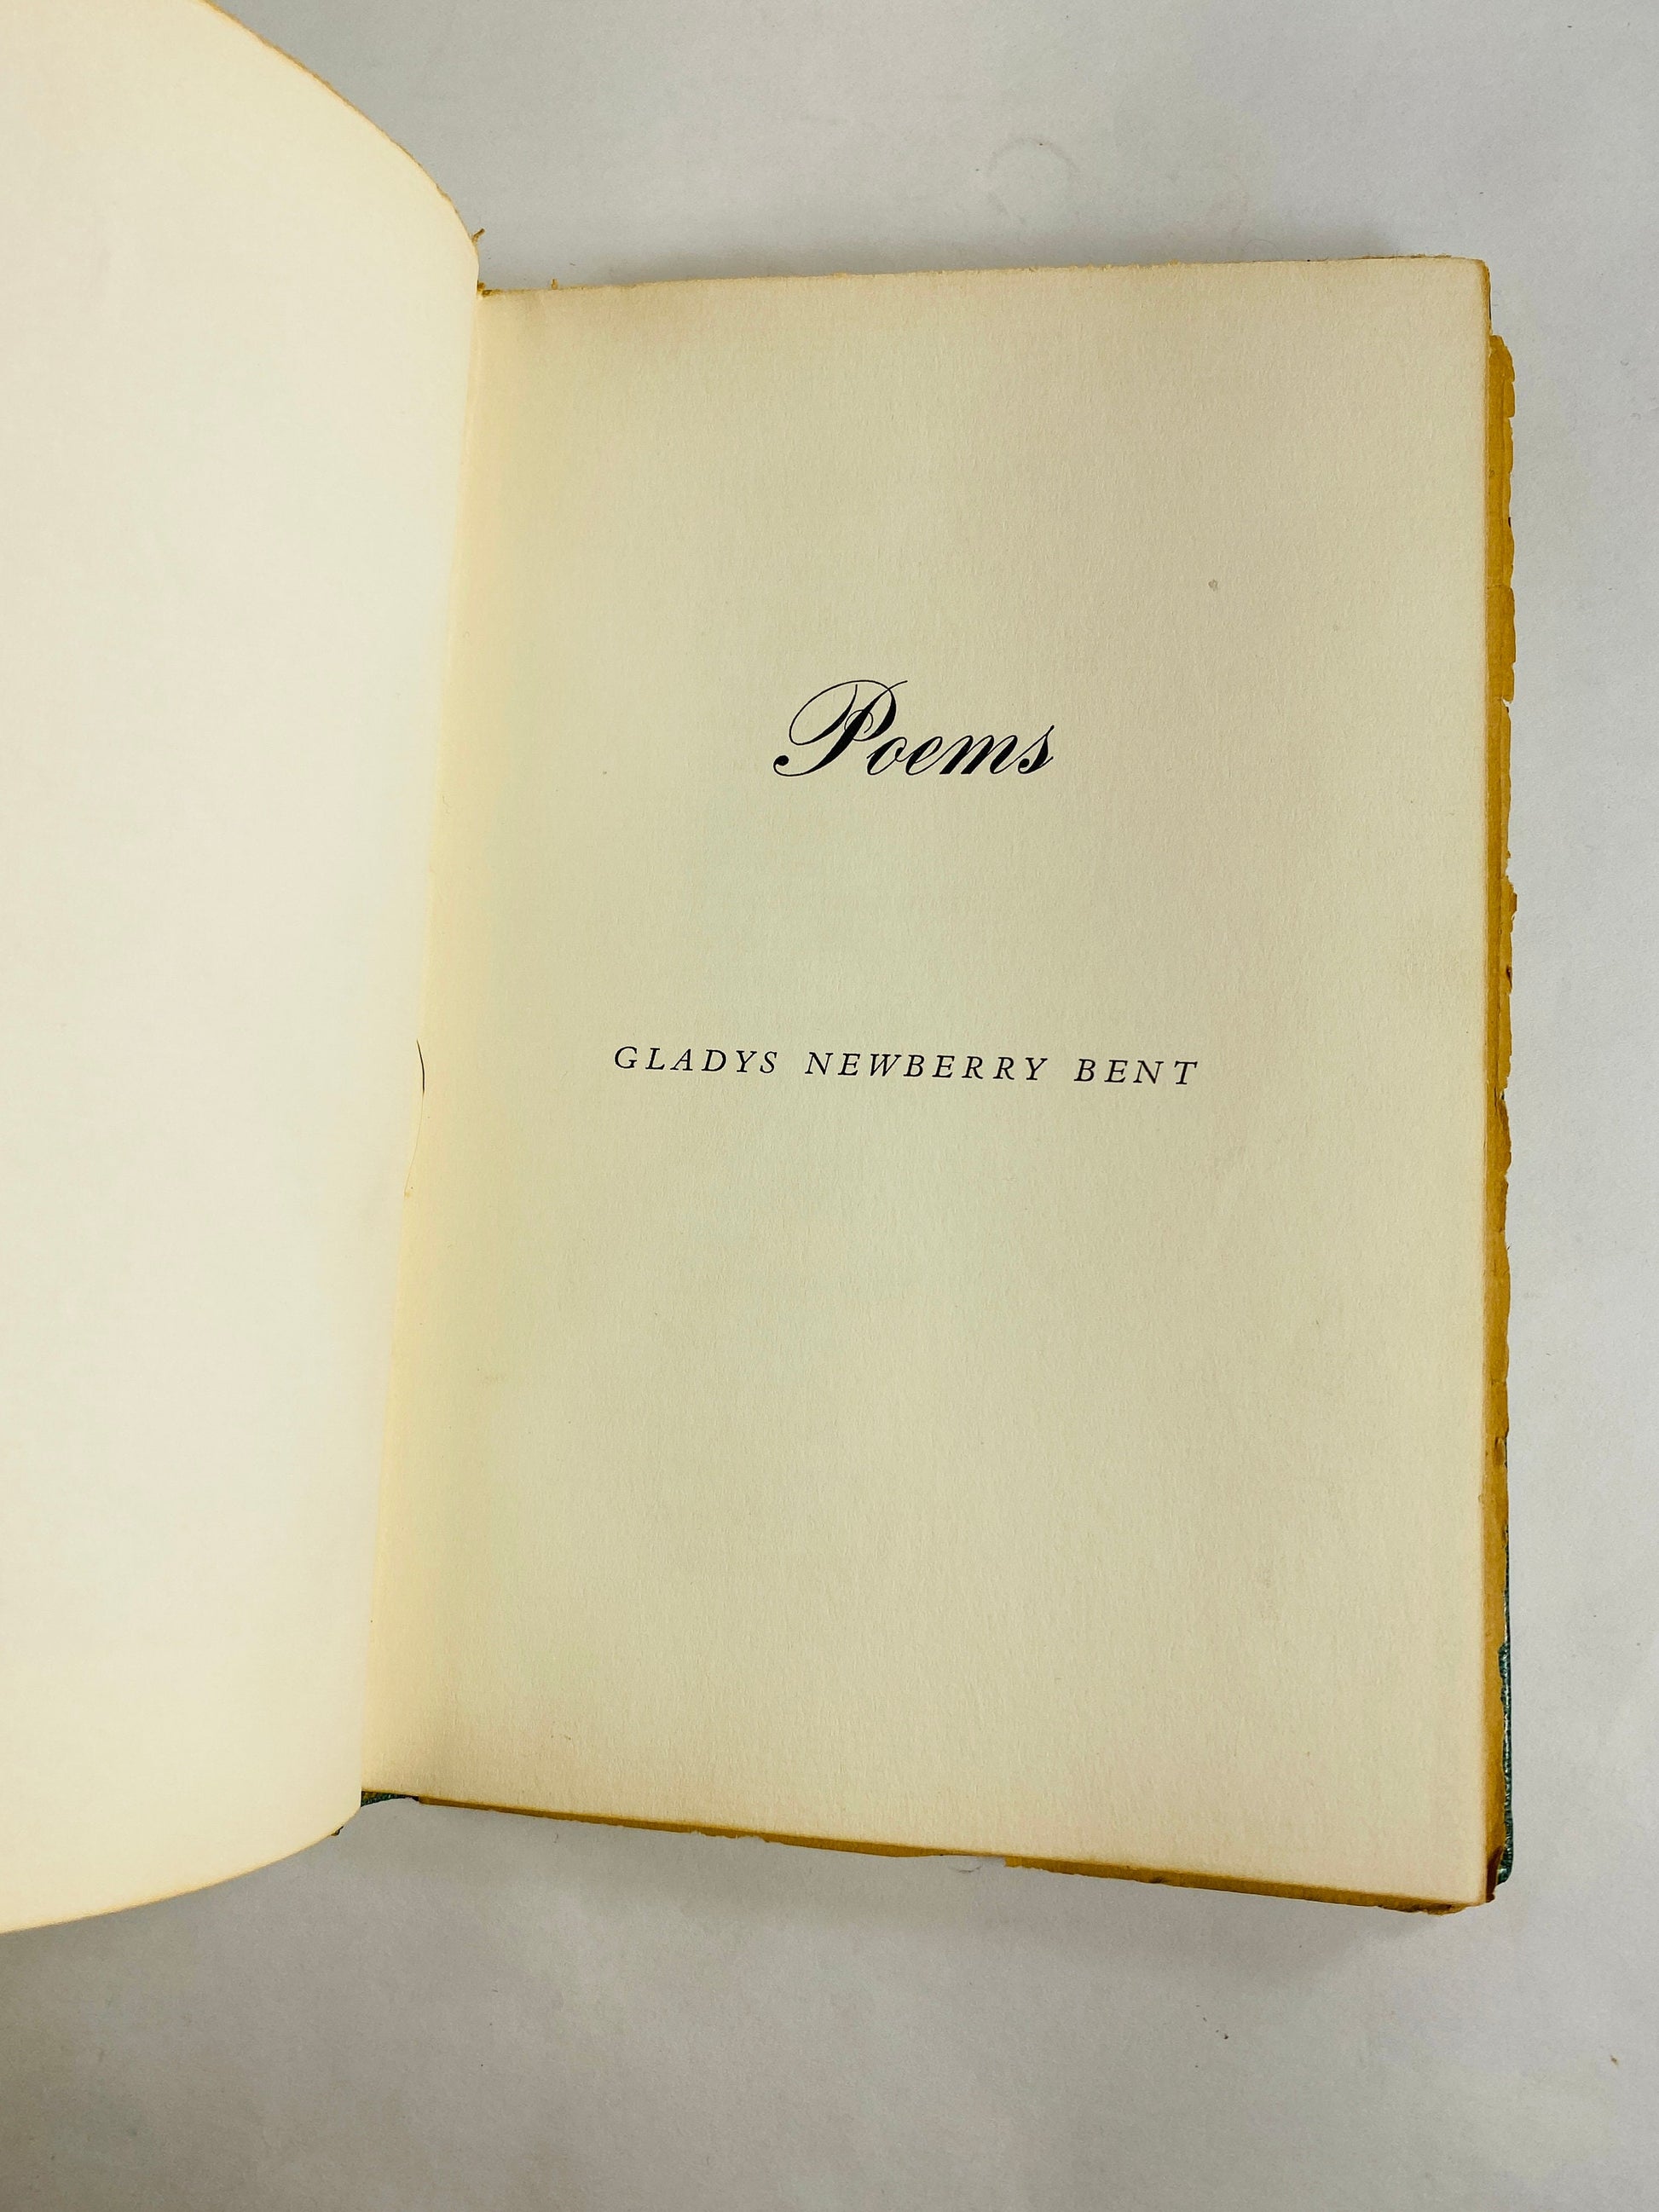 Gladys Newberry Bent married Charles Edward RARE poetry book SIGNED by Grace circa 1957 Manchester Connecticut Los Angeles California Pomona